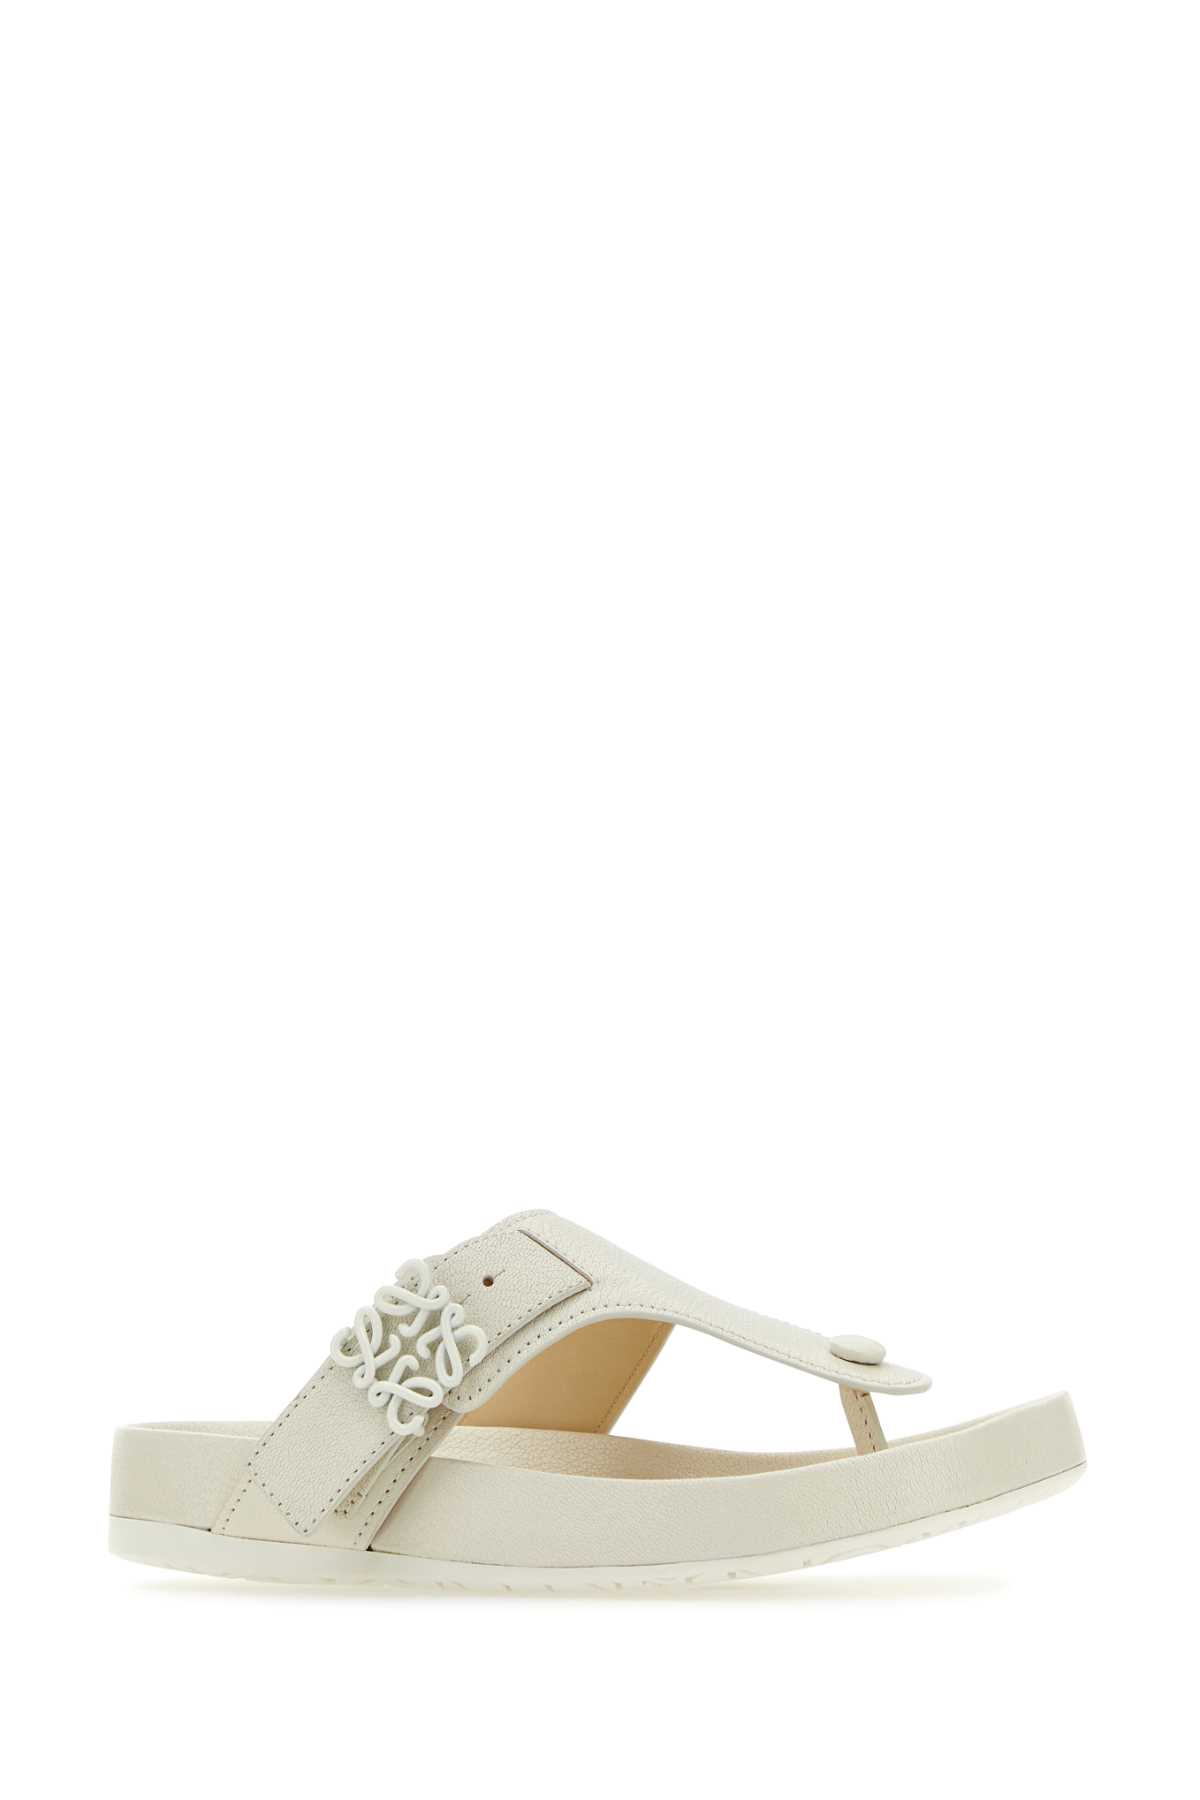 Loewe Chalk Leather Ease Thong Slippers In White